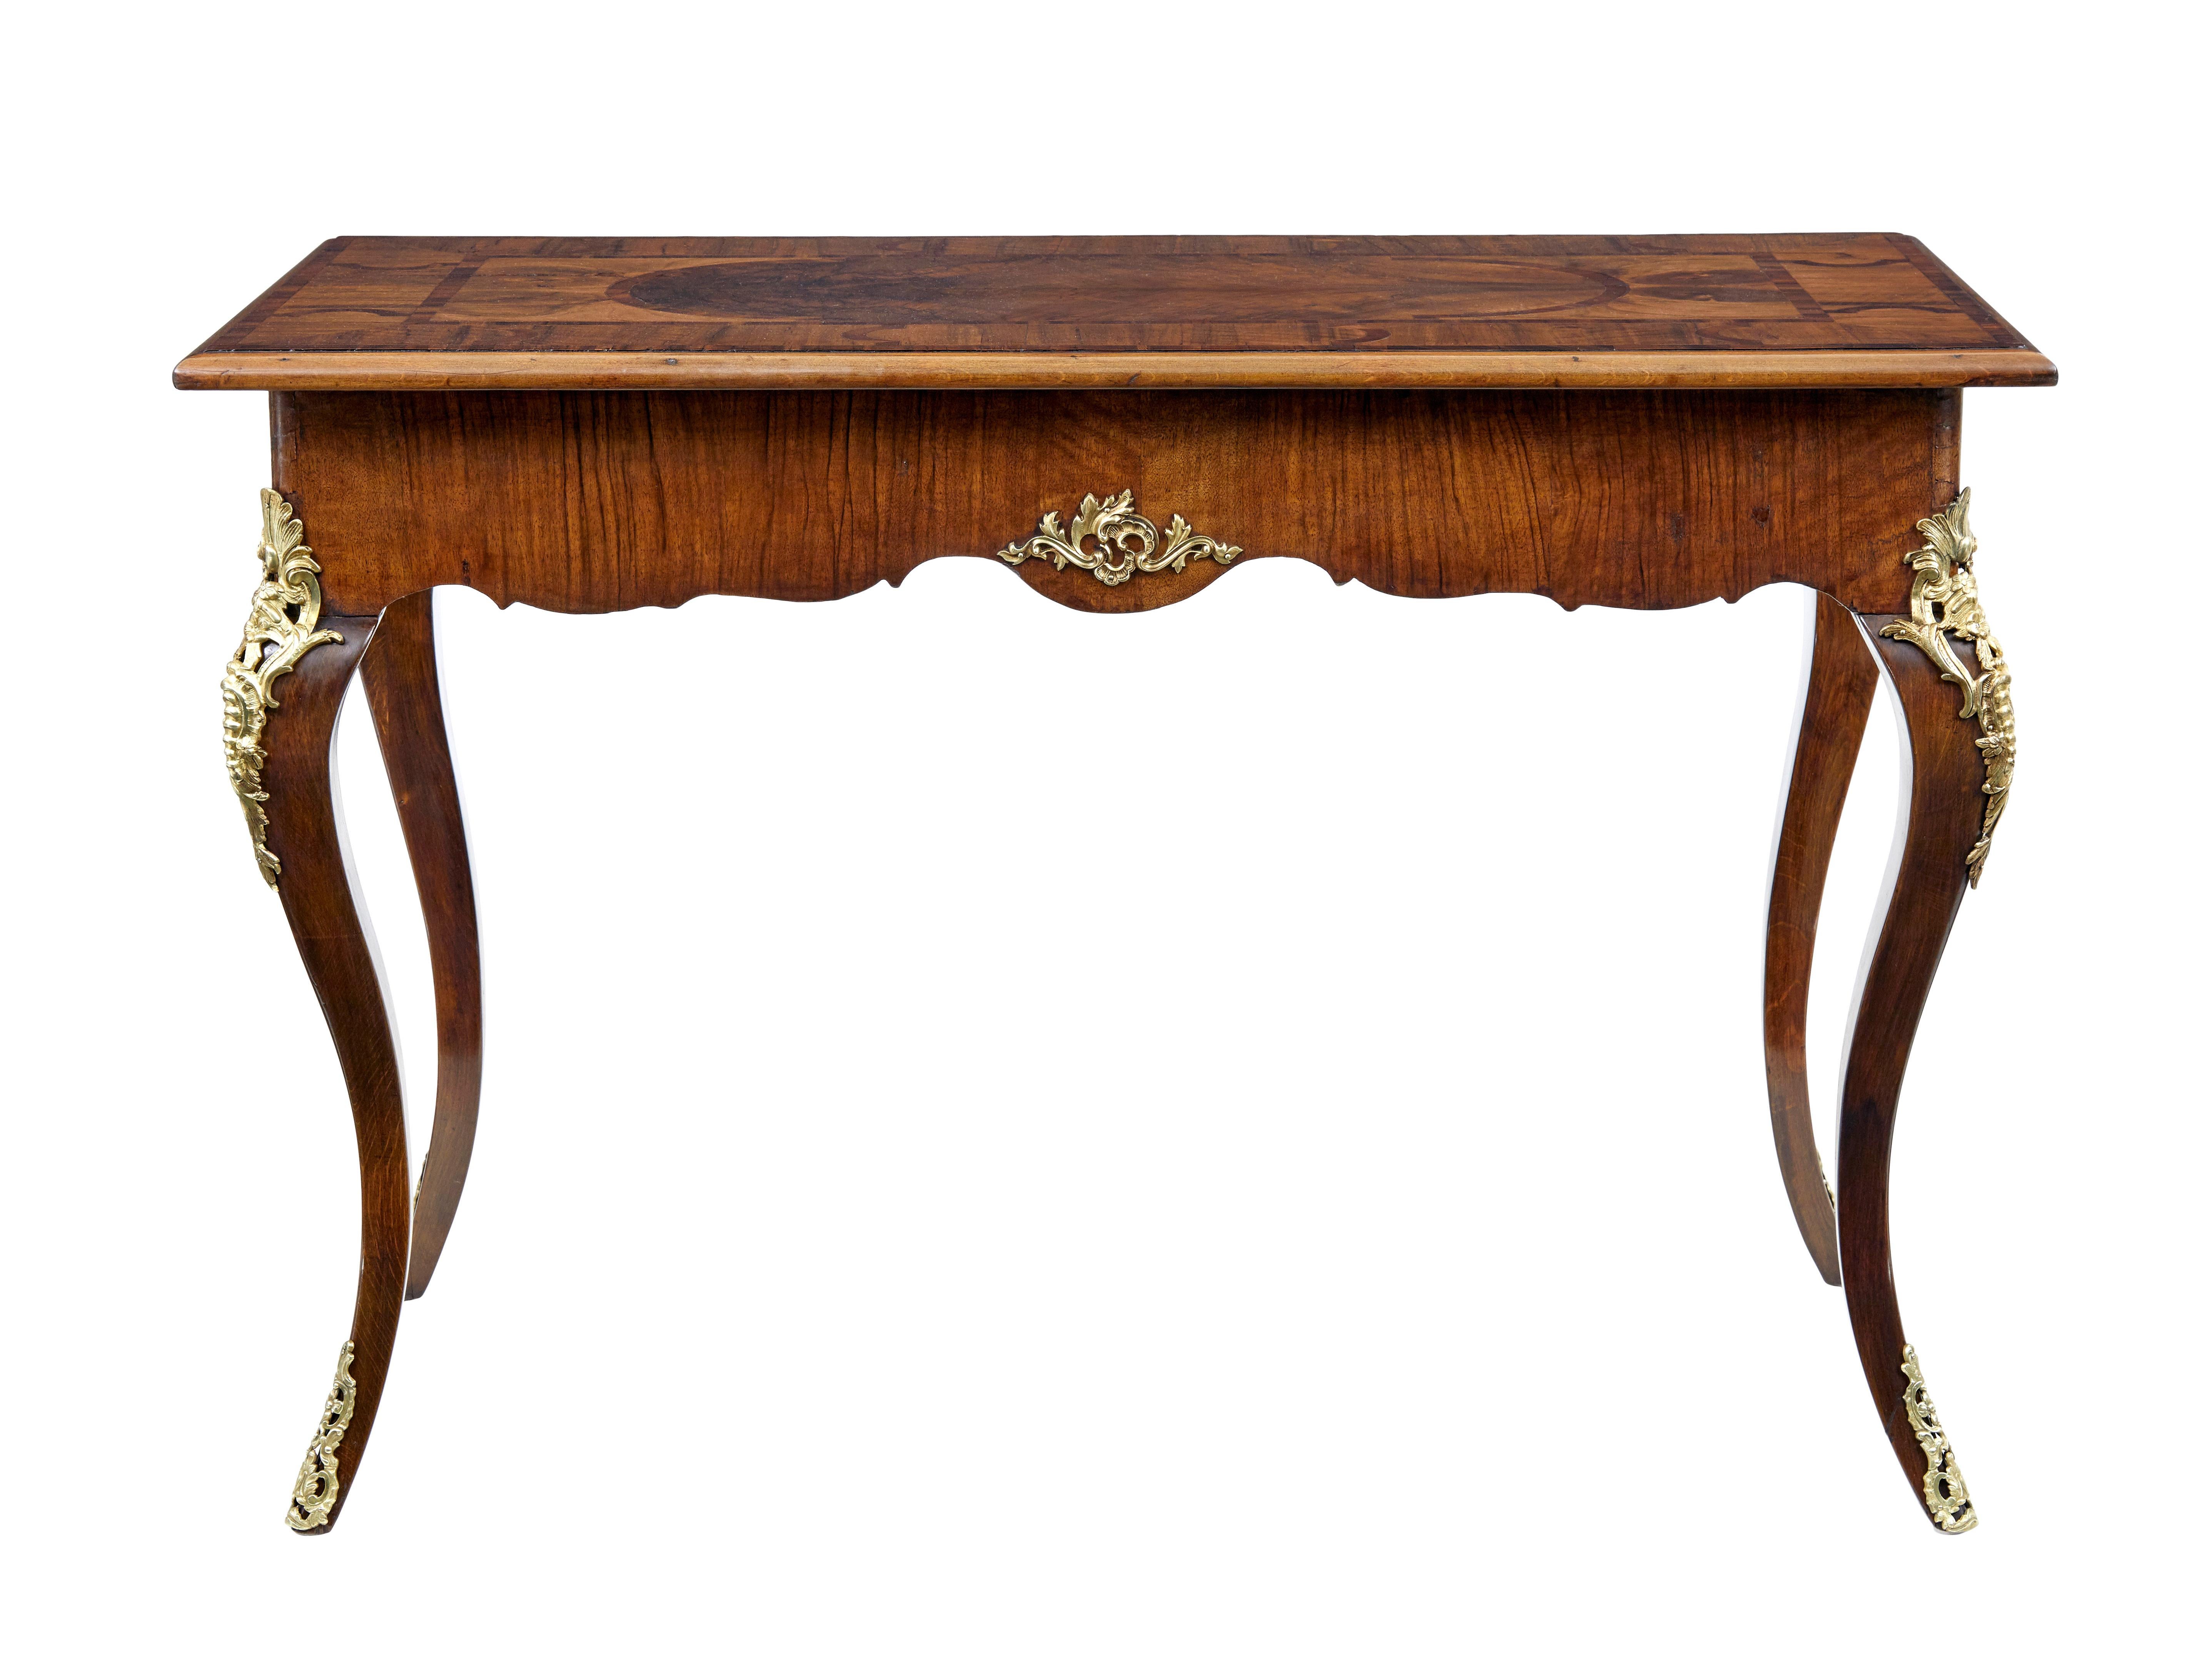 Hand-Crafted 19th Century rococo revival walnut and ormolu side table For Sale